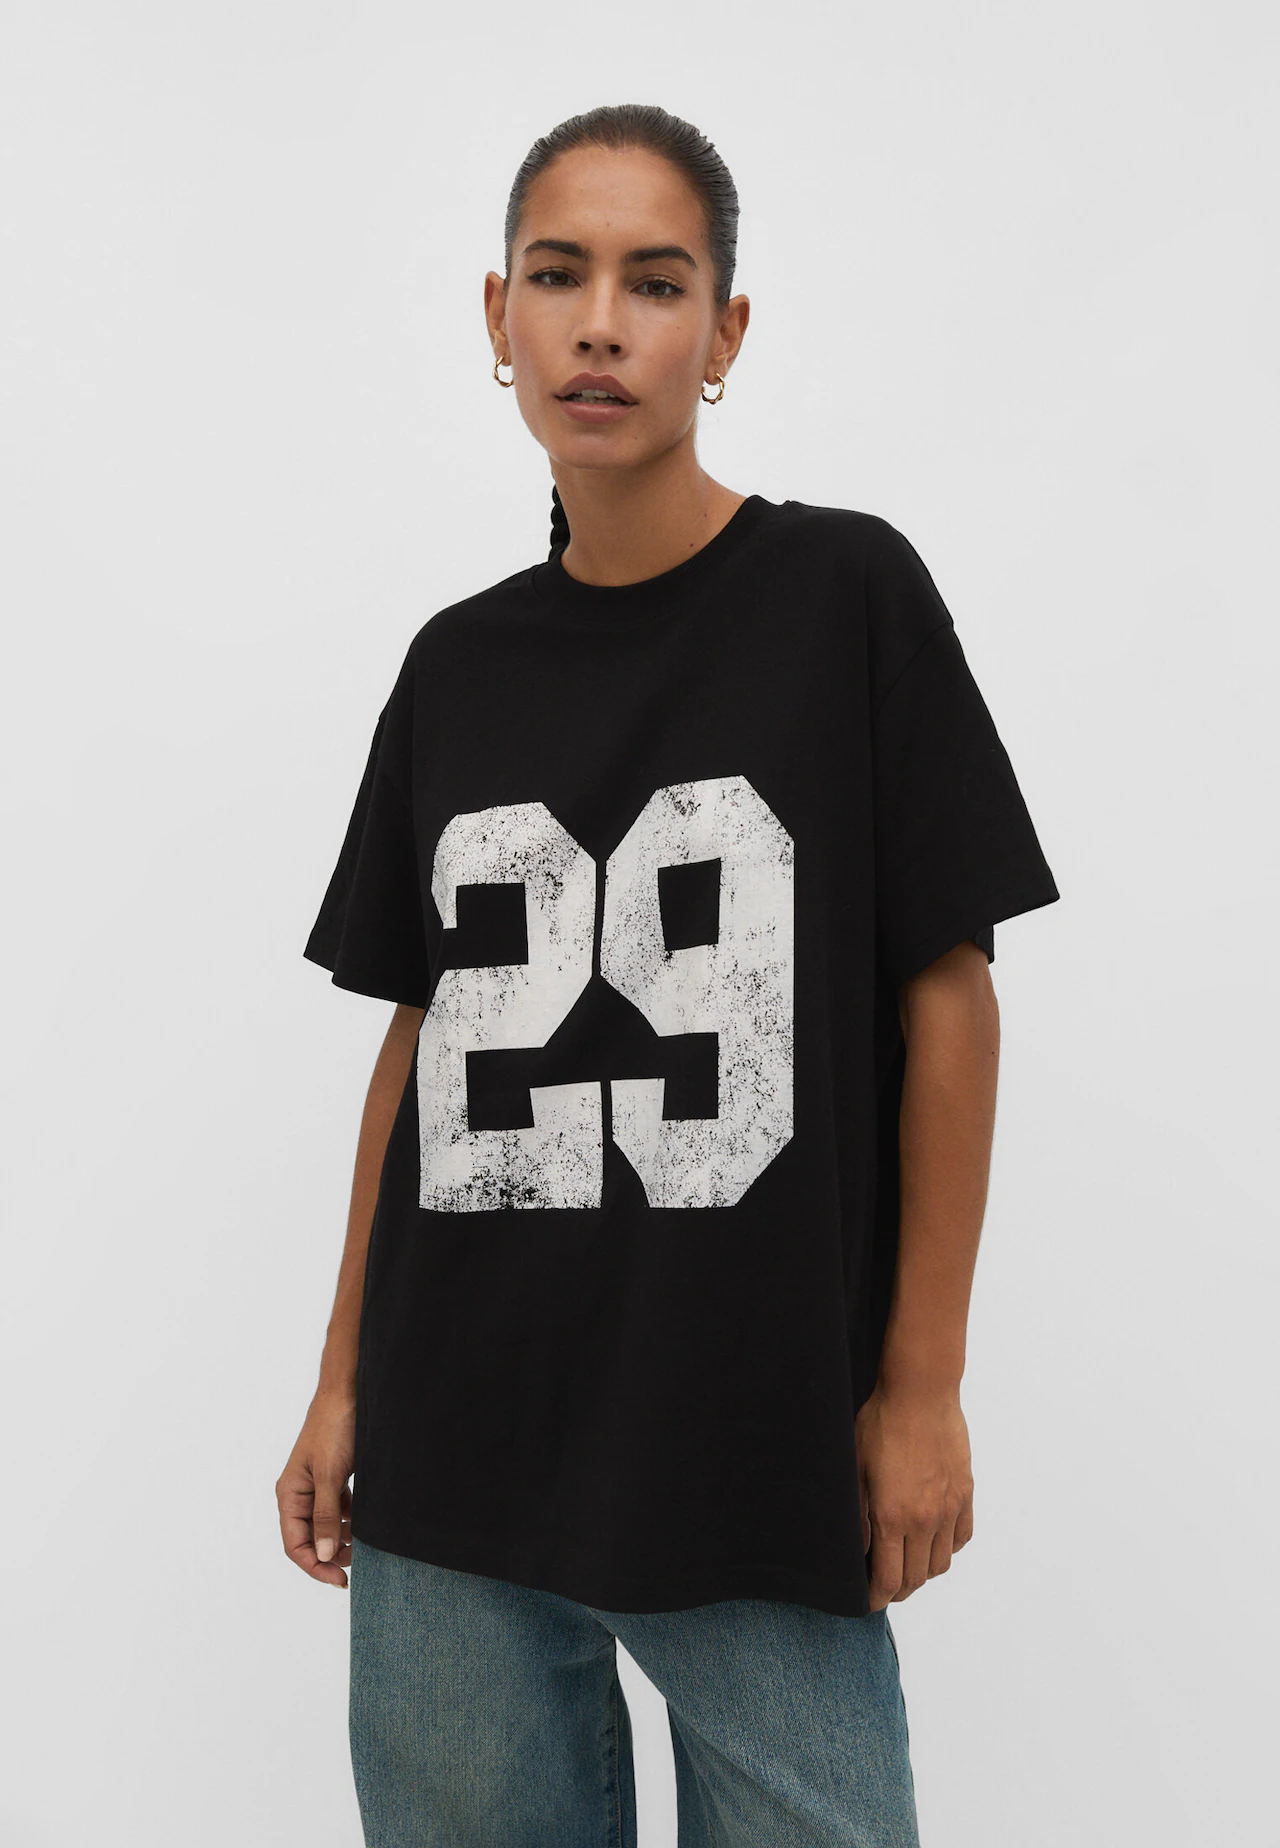 Oversize T-shirt with number print - Women's fashion